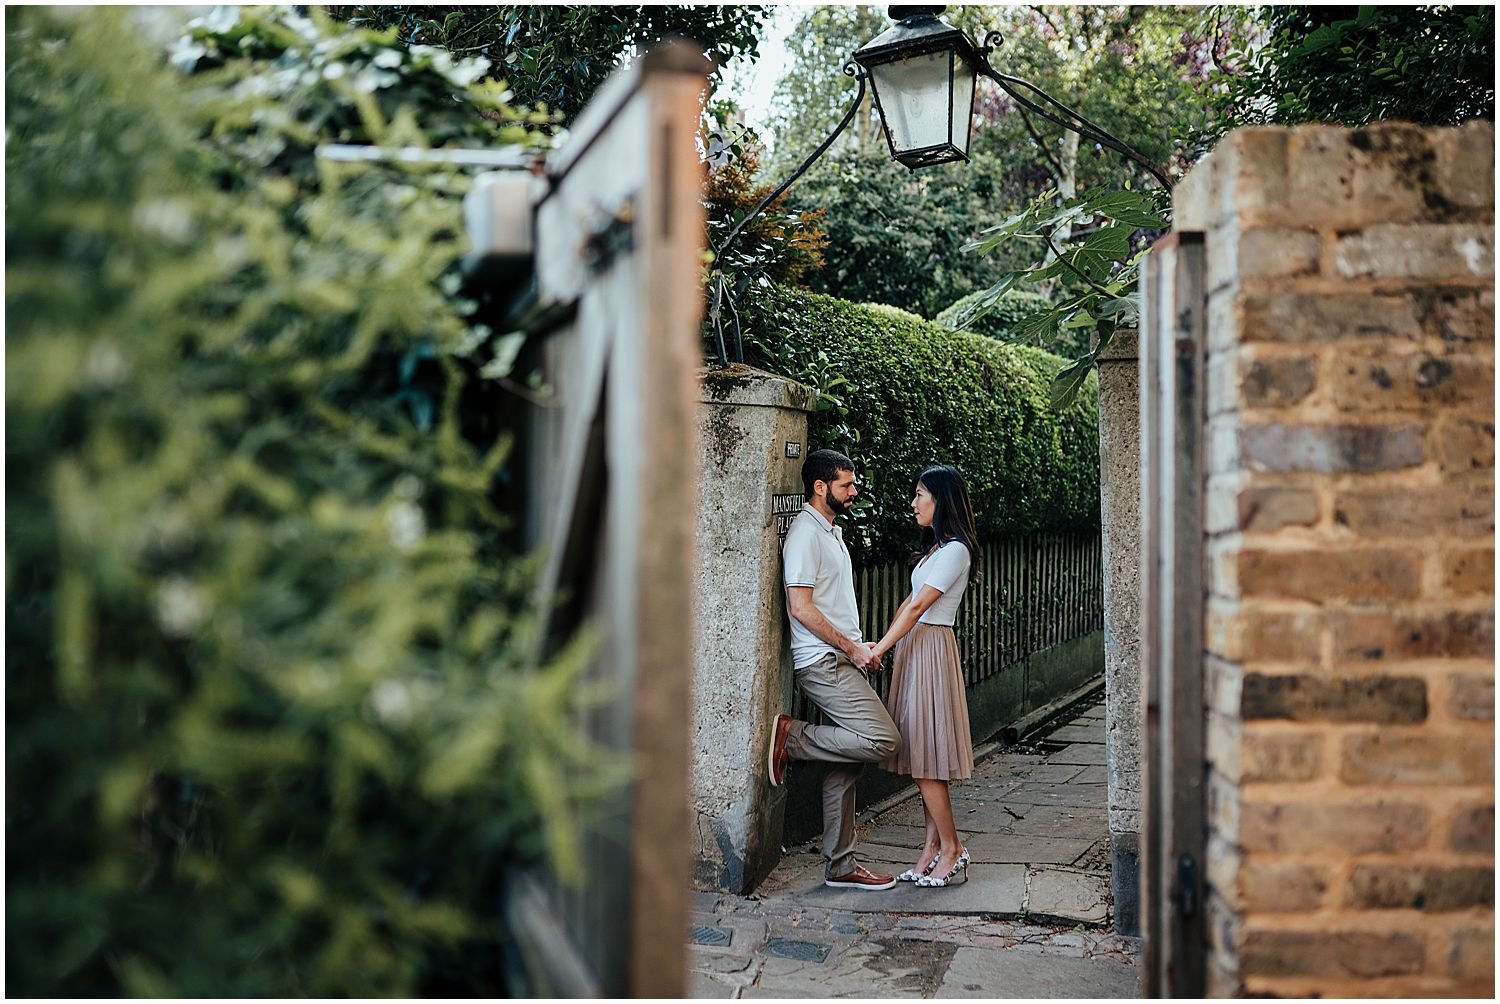 Relaxed engagement photos around the streets of London